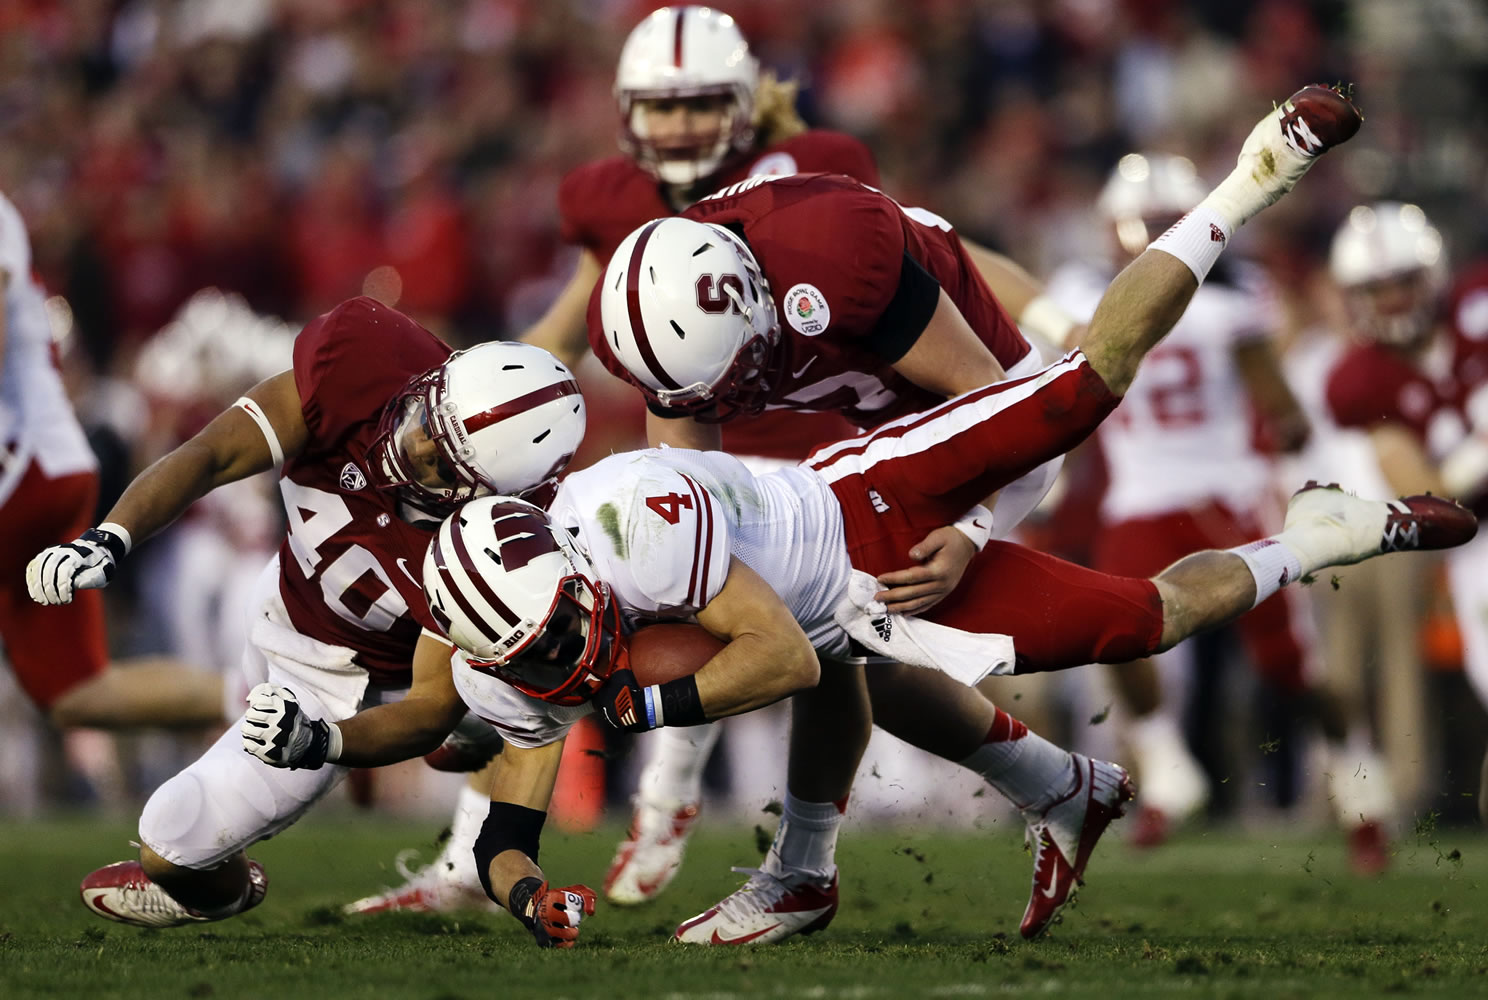 Wisconsin wide receiver Jared Abbrederis is hit by Stanford linebacker Joe Hemschoot (40) during the second half of the Rose Bowl on Tuesday.